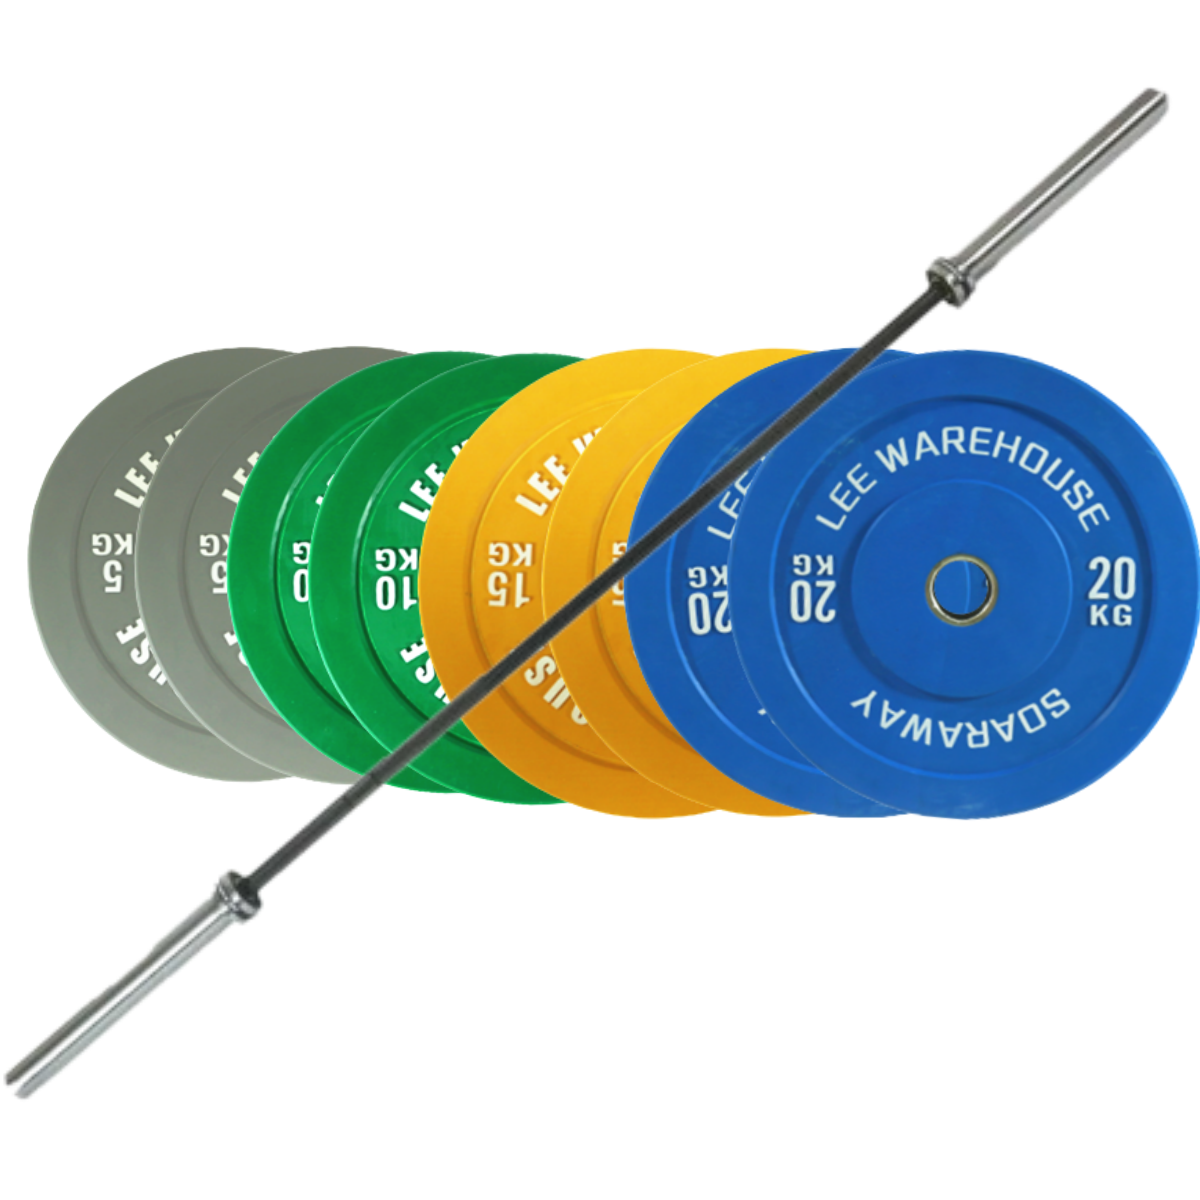 120kg Bumper Plates Set with Barbell